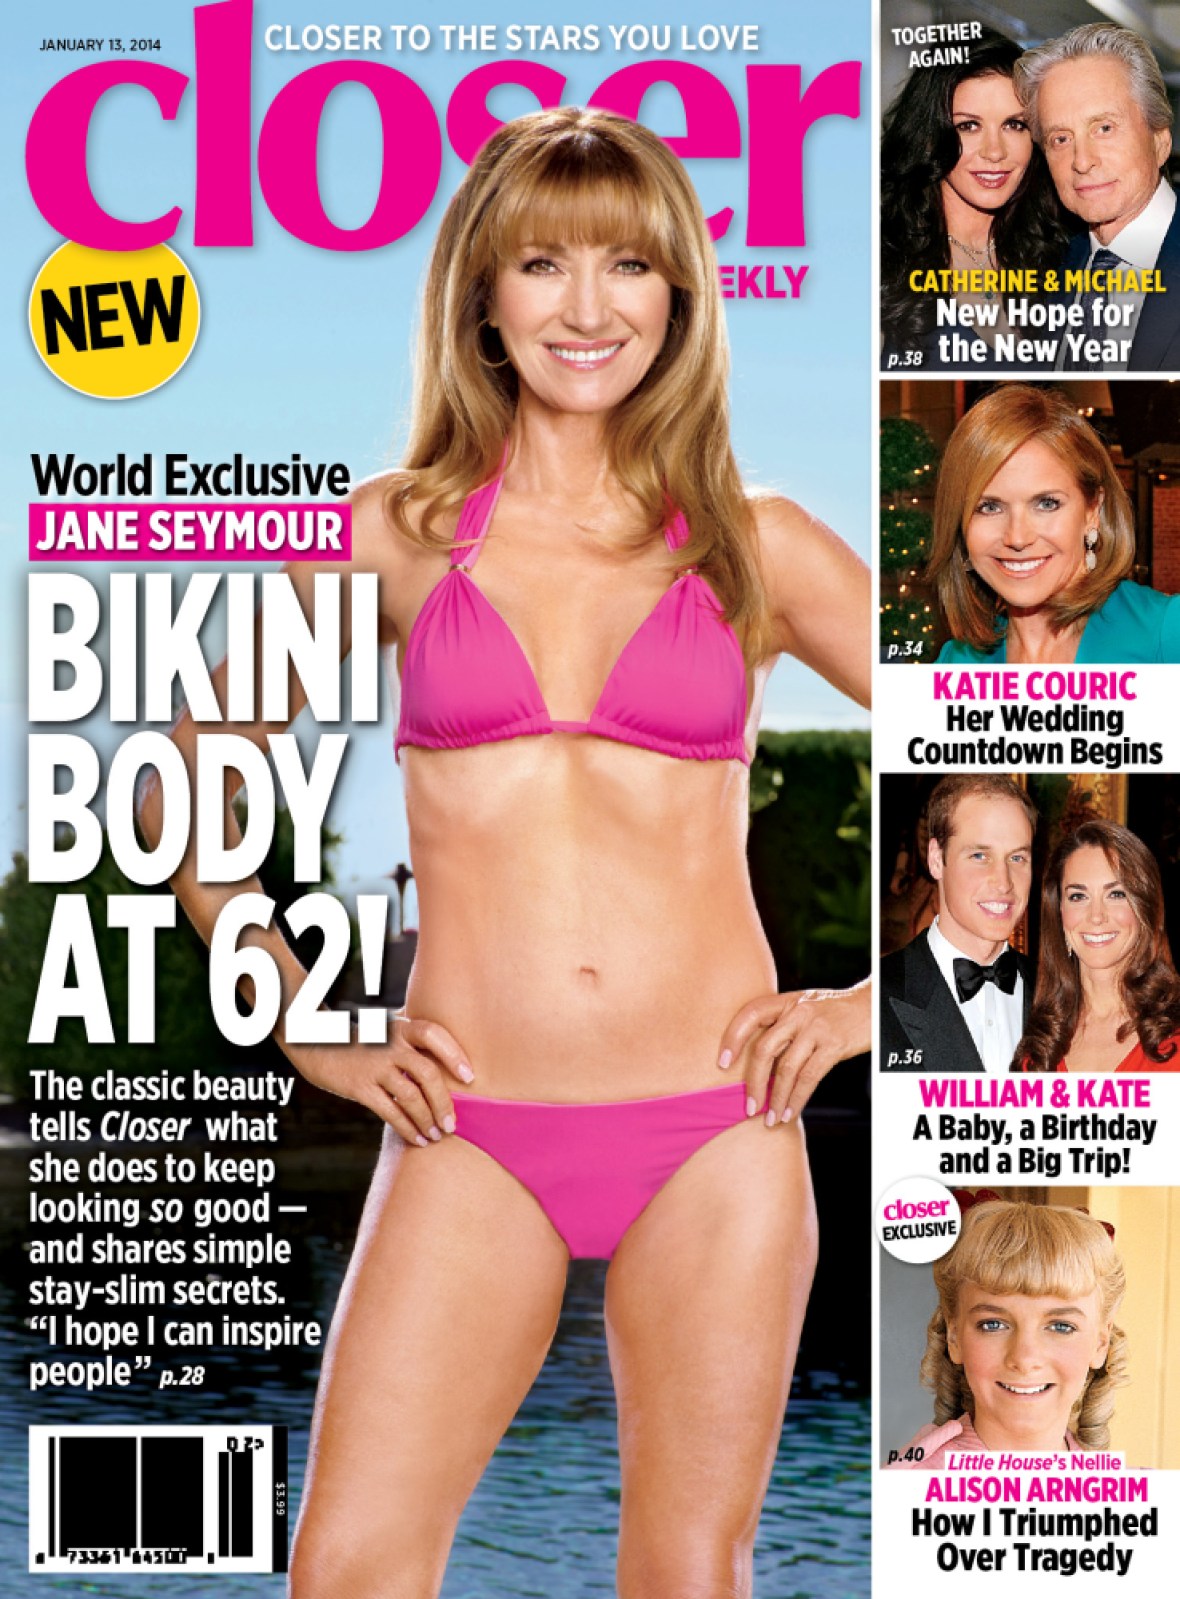 Jane Seymour Closer Cover ?w=750&h=1000&crop=1&resize=1180%2C1599